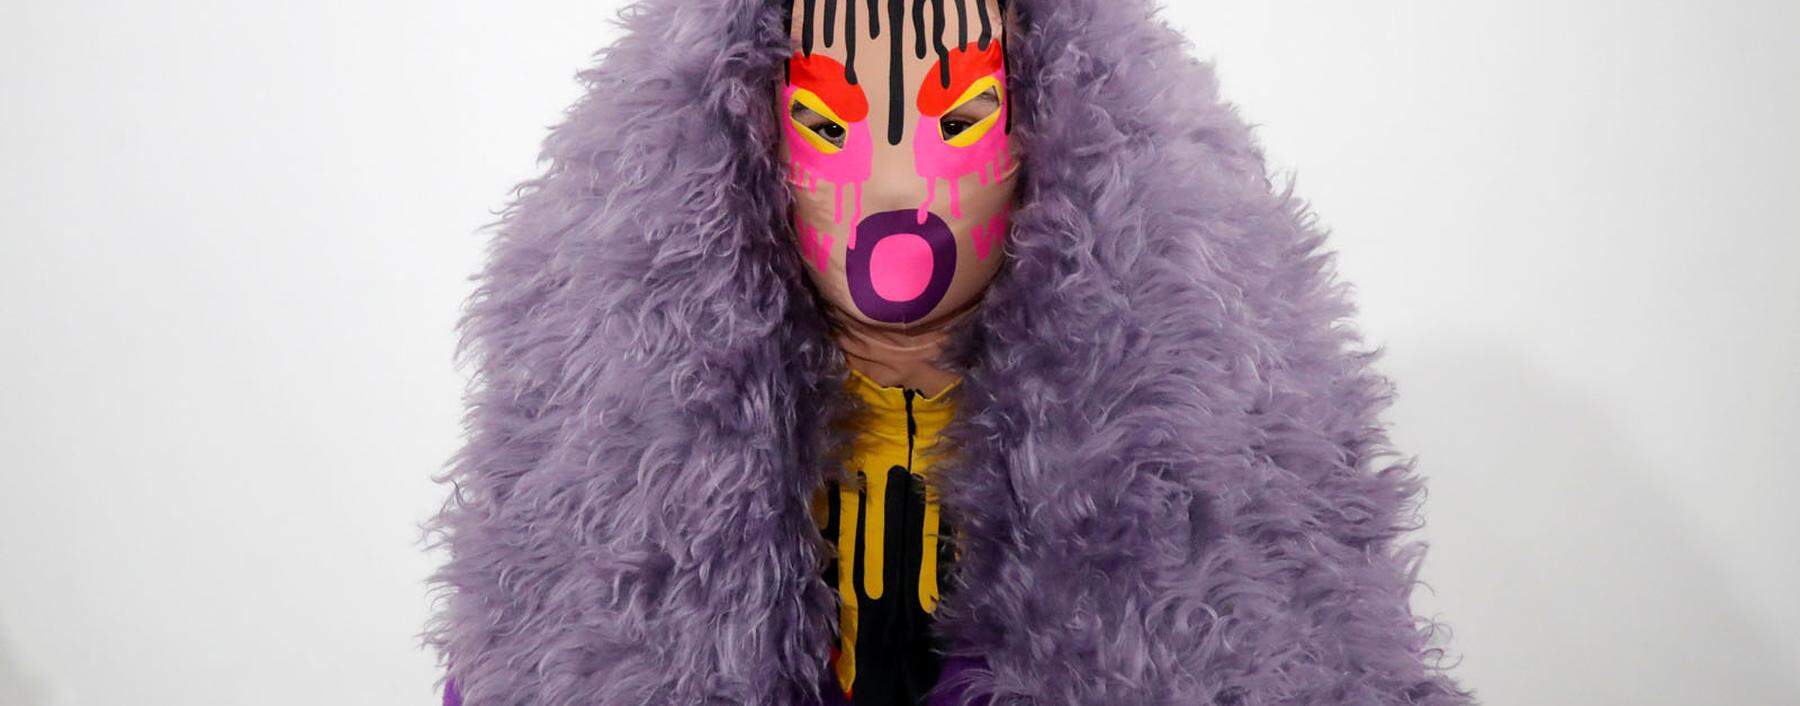 A model presents a creation by designer Walter Van Beirendonck as part of his Fall/Winter 2019-2020 collection show during Men´s Fashion Week in Paris